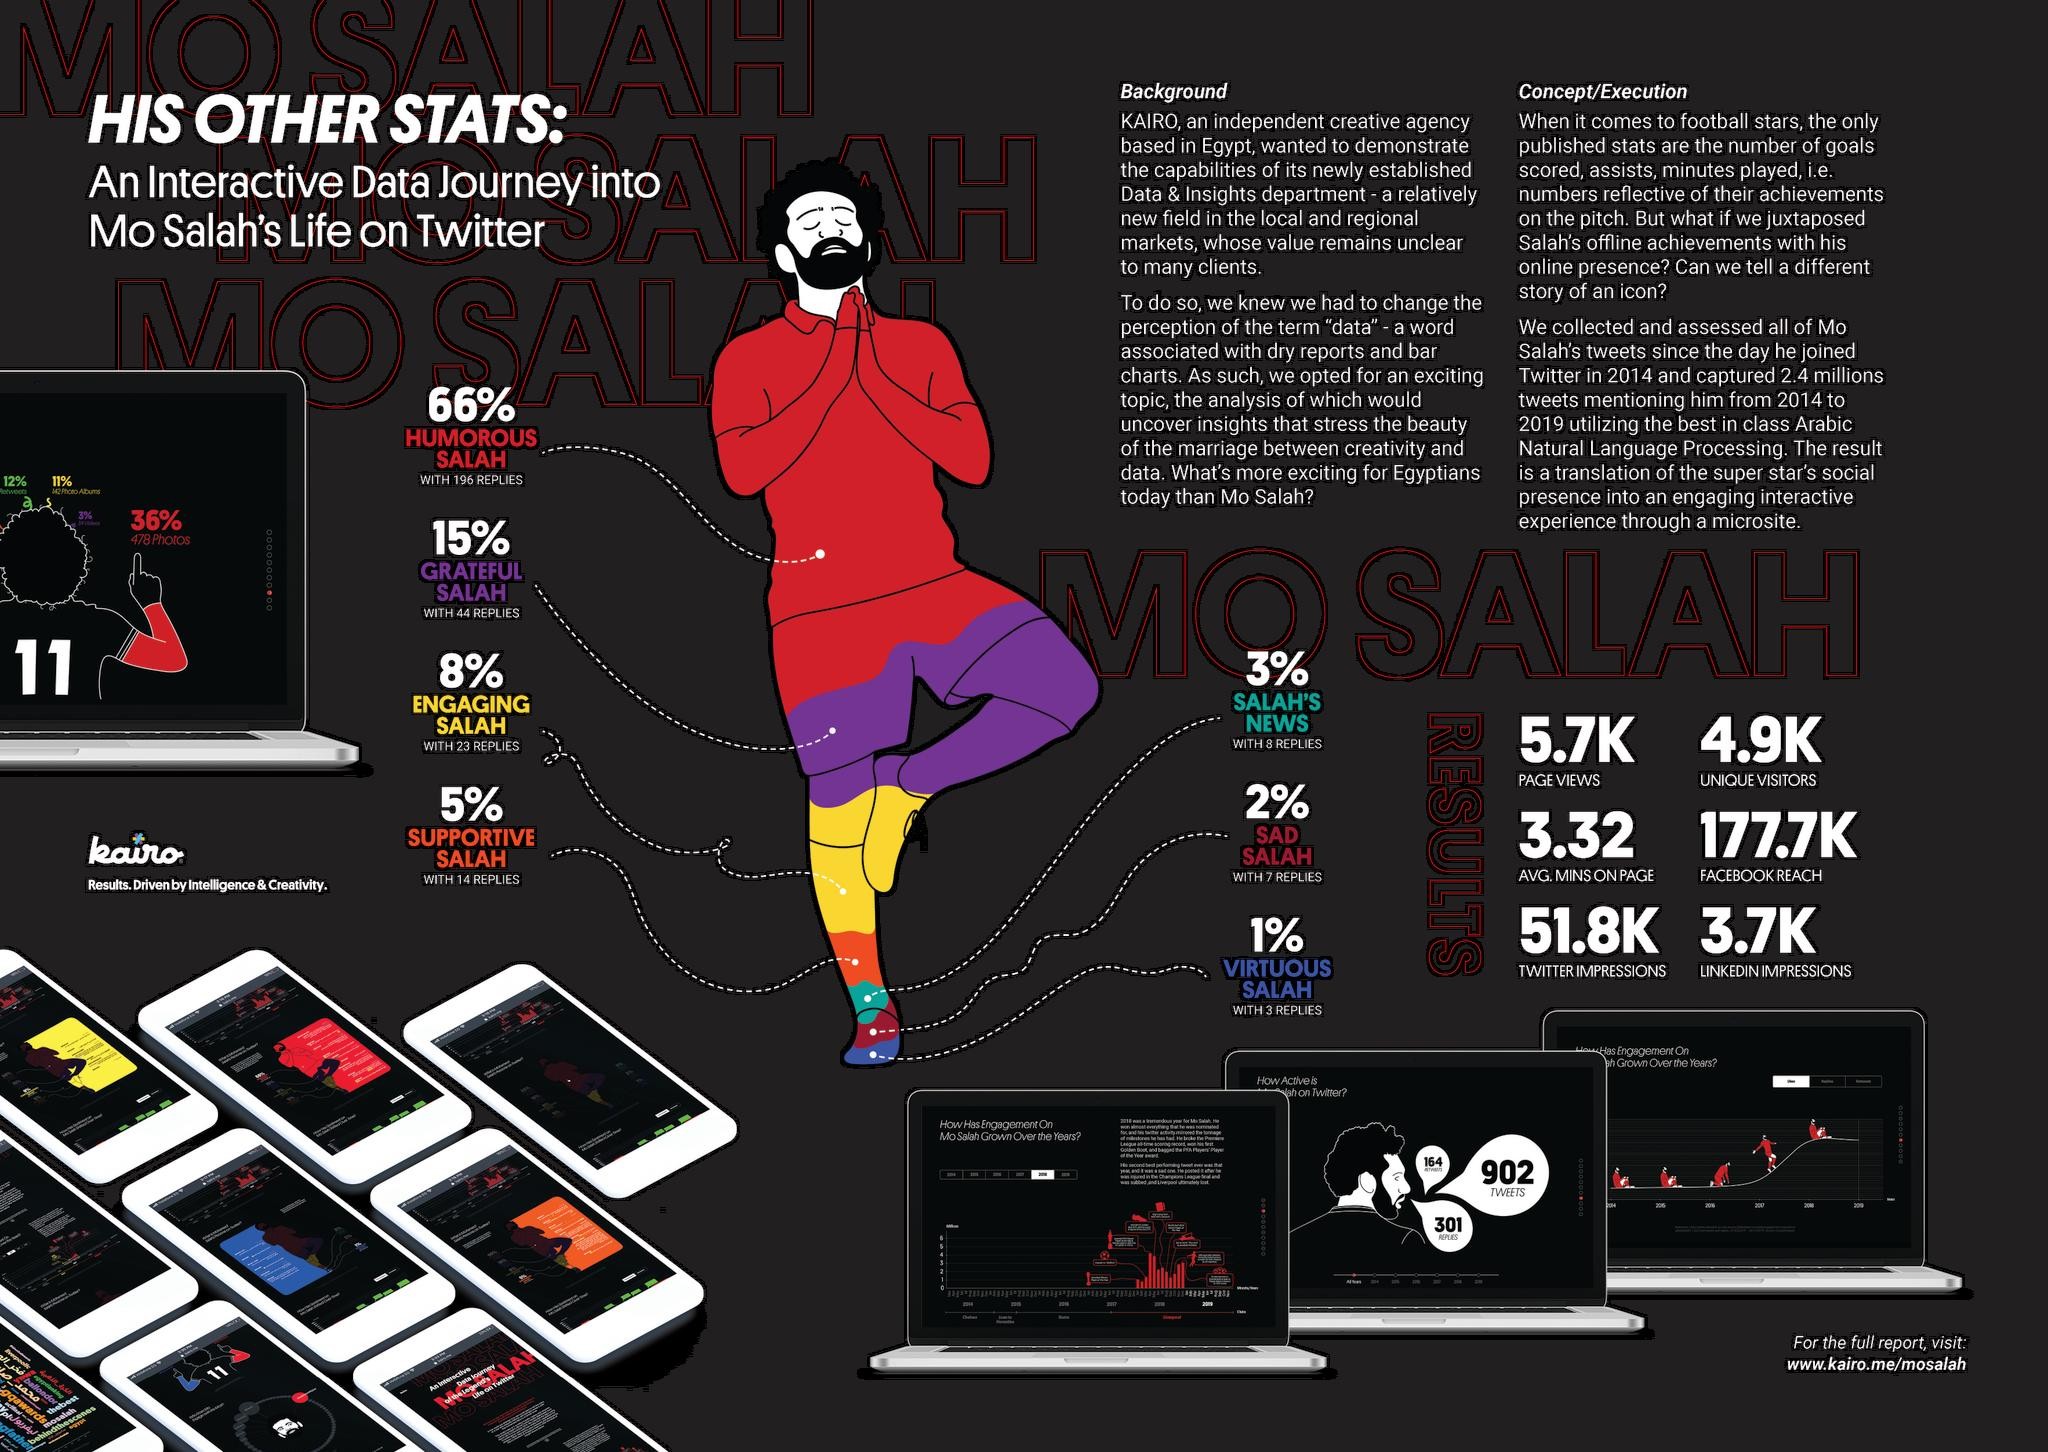 "HIS OTHER STATS": AN INTERACTIVE DATA JOURNEY INTO MO SALAH'S LIFE ON TWITTER